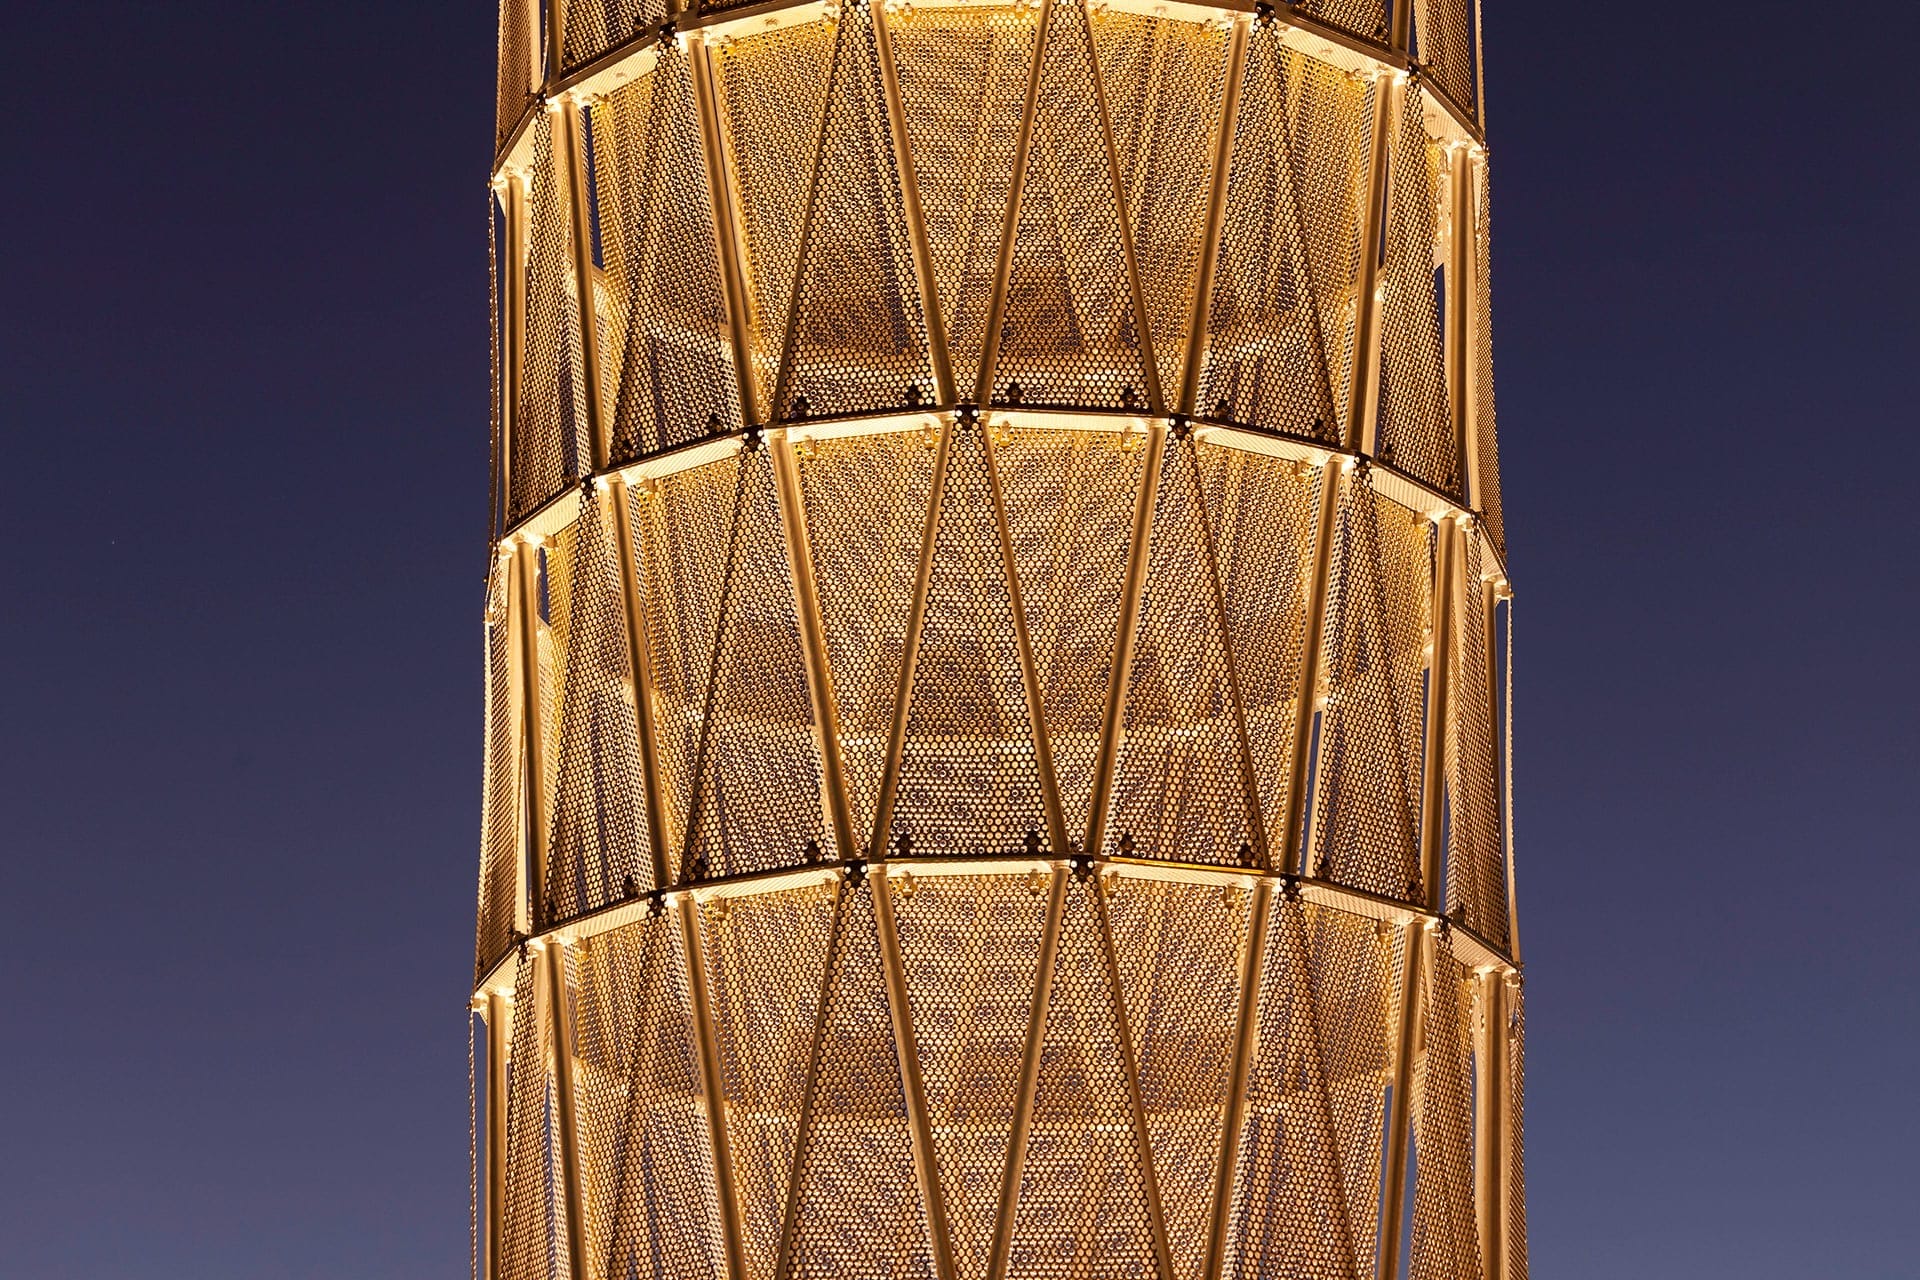 Perforated panels on Hope Tower at UNMC at dusk.